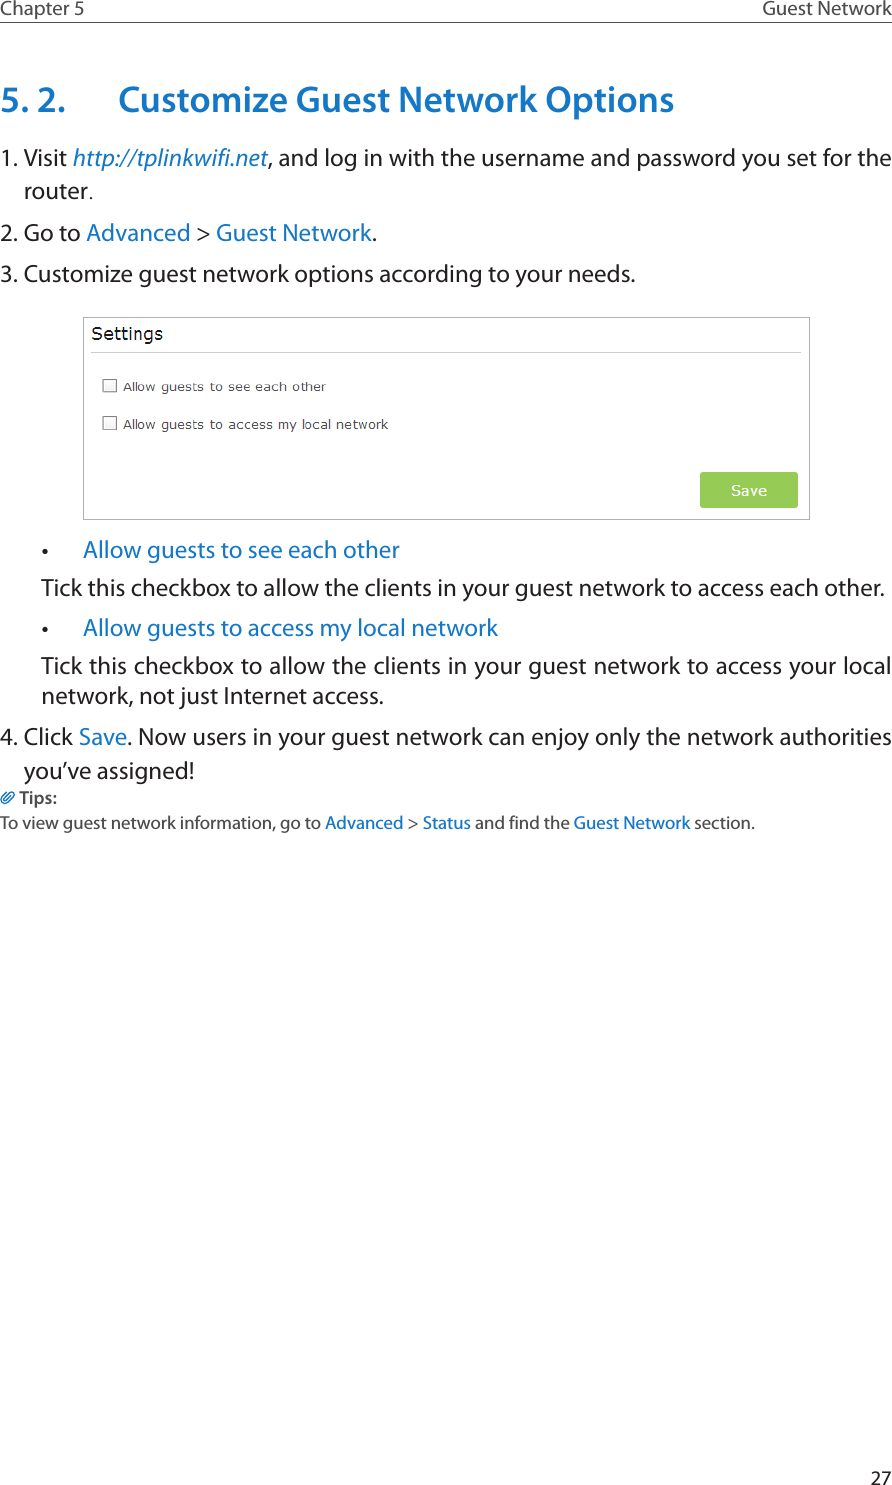 27Chapter 5 Guest Network5. 2.  Customize Guest Network Options1. Visit http://tplinkwifi.net, and log in with the username and password you set for the router.2. Go to Advanced &gt; Guest Network.3. Customize guest network options according to your needs.•  Allow guests to see each otherTick this checkbox to allow the clients in your guest network to access each other. •  Allow guests to access my local network Tick this checkbox to allow the clients in your guest network to access your local network, not just Internet access. 4. Click Save. Now users in your guest network can enjoy only the network authorities you’ve assigned!Tips:To view guest network information, go to Advanced &gt; Status and find the Guest Network section.